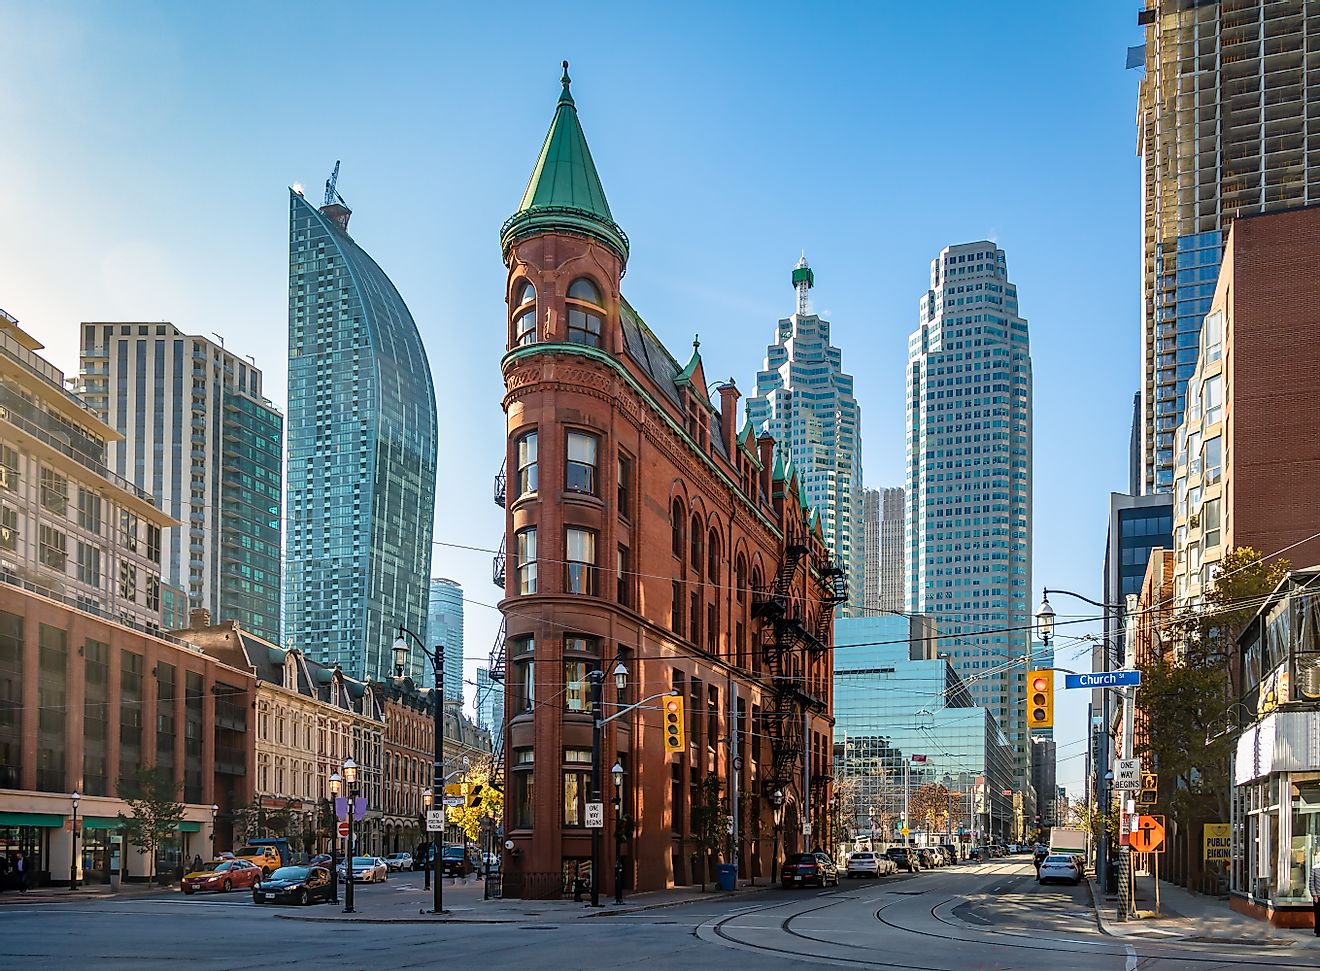 The Gooderham Building, also known as the Flatiron Building, is an historic office building at 49 Wellington Street East in Toronto, Ontario, Canada.